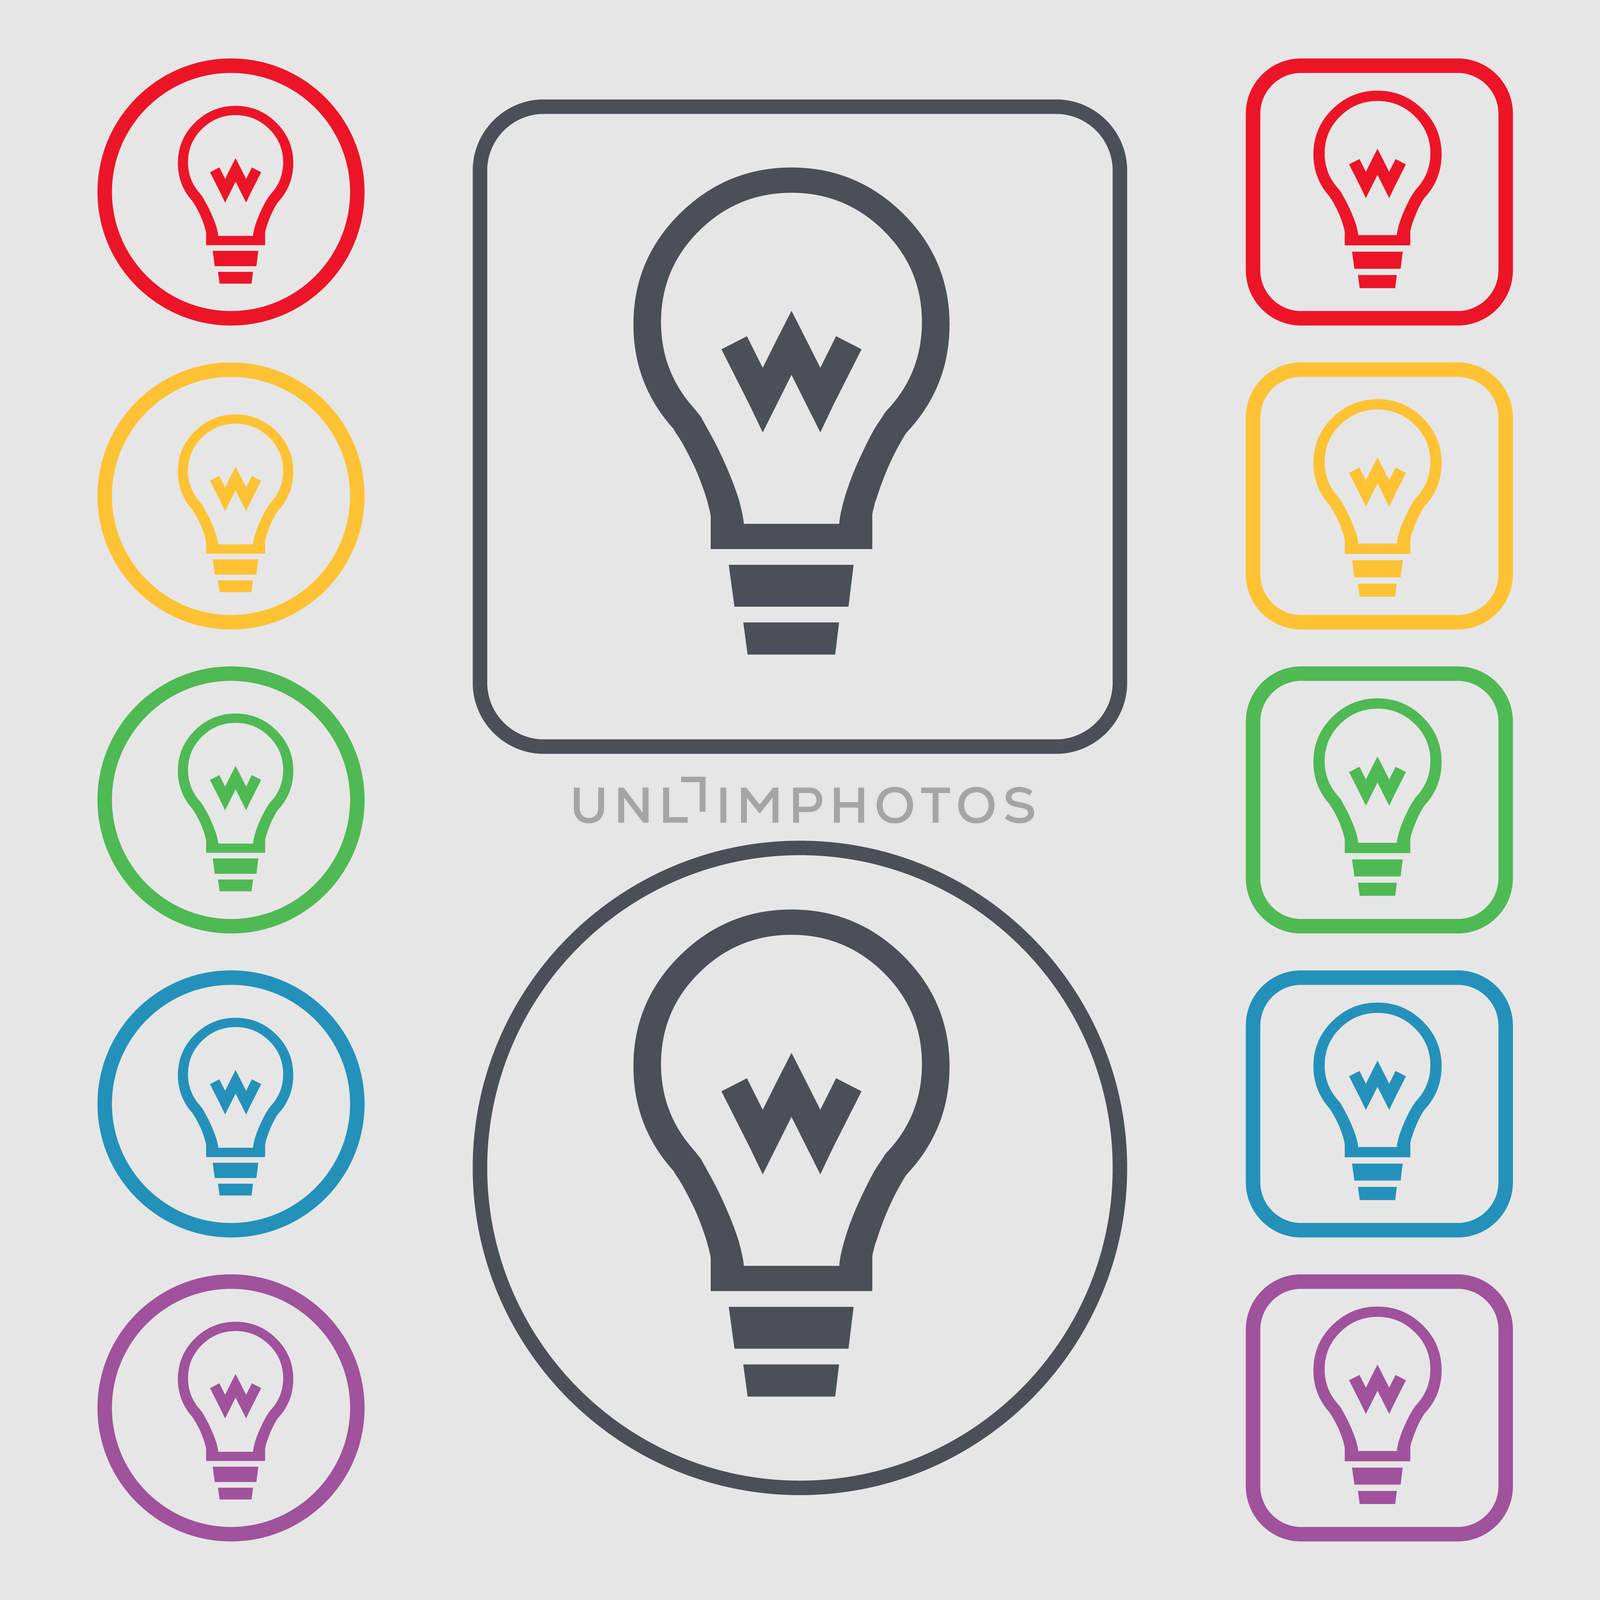 Light bulb icon sign. symbol on the Round and square buttons with frame. illustration